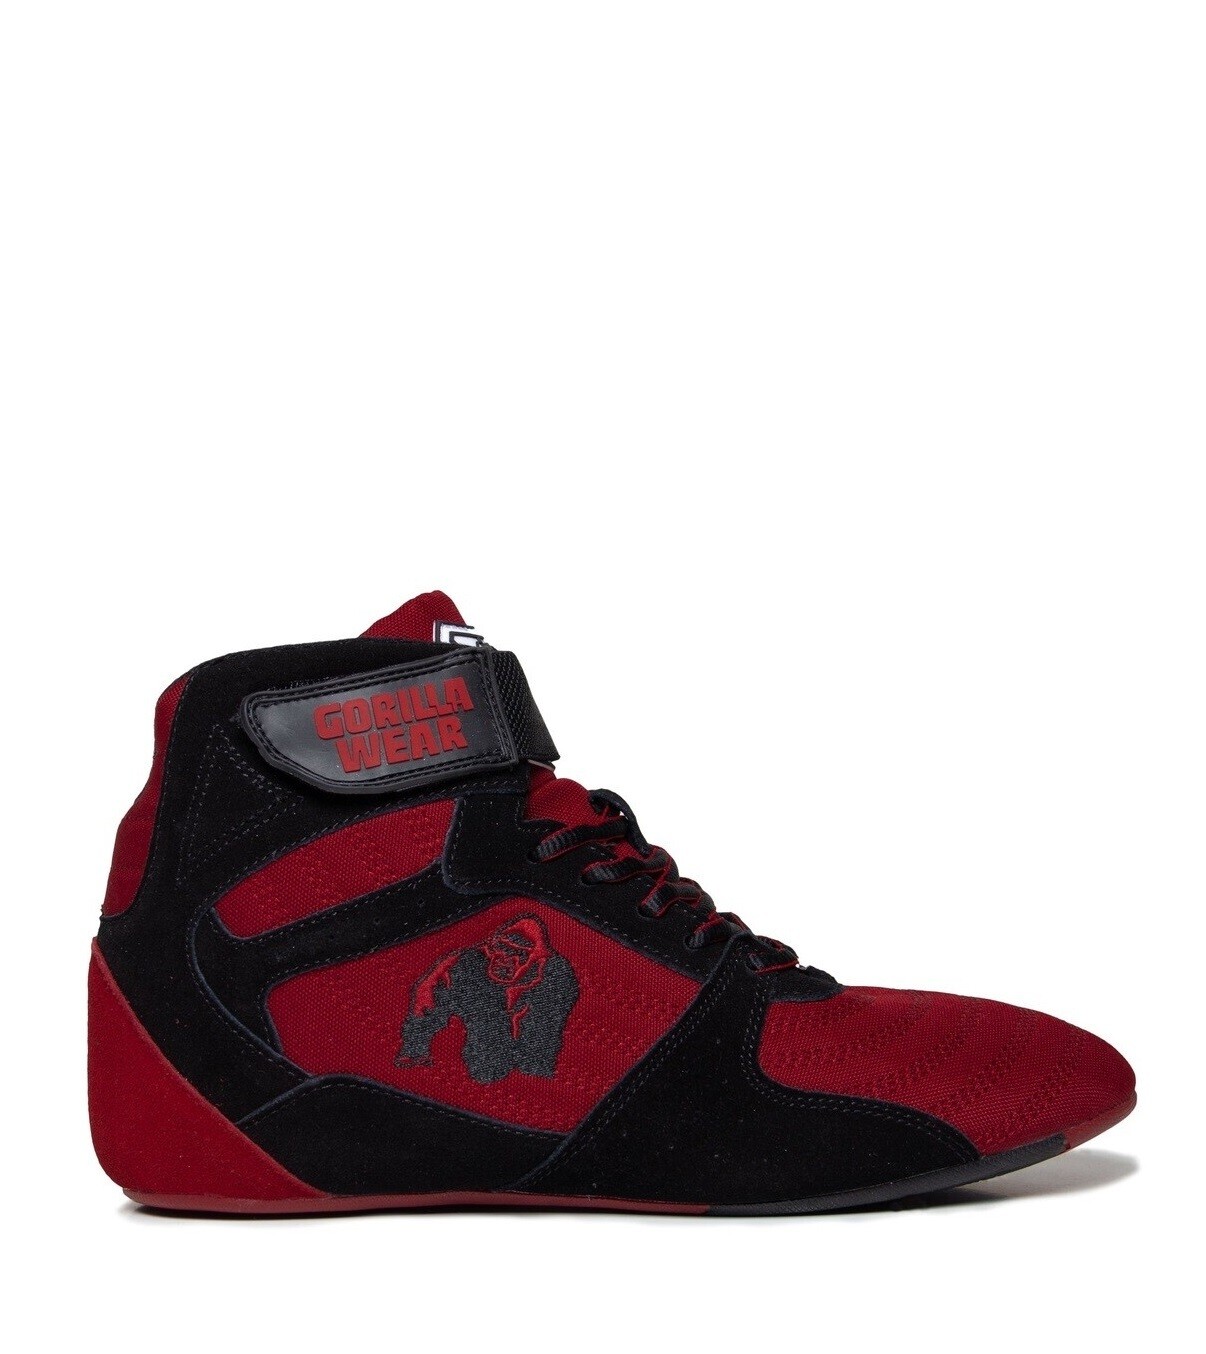 Кроссовки "Perry High Tops", Black/Red, GorillaWear